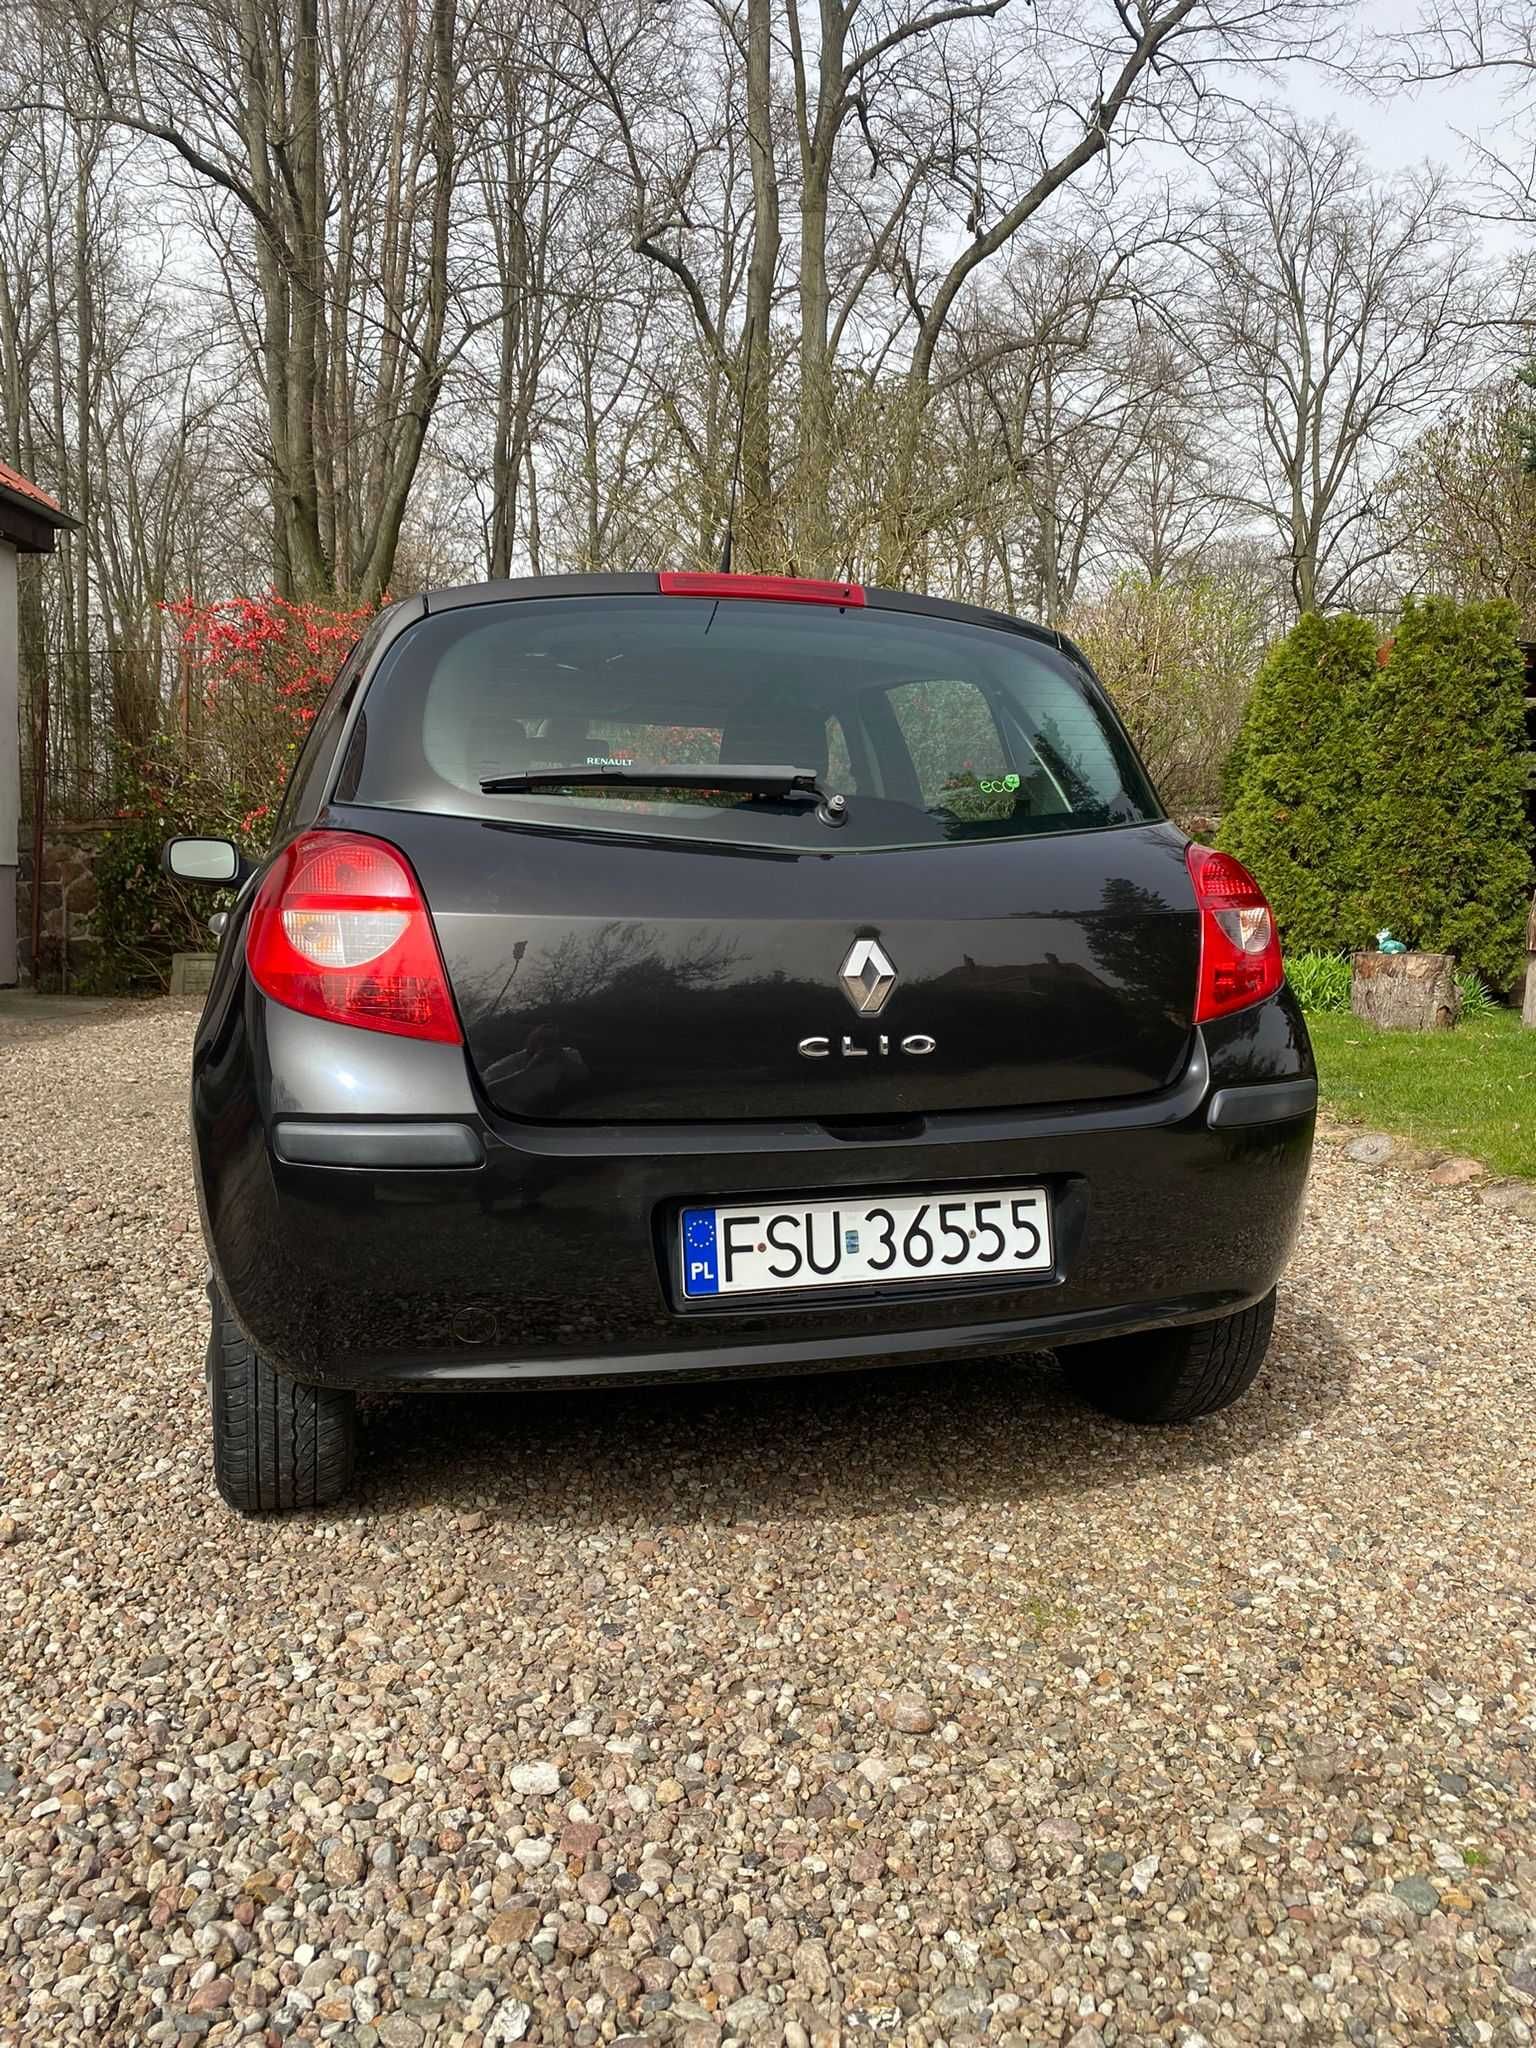 Renault Clio 1.2 benzyna 2008